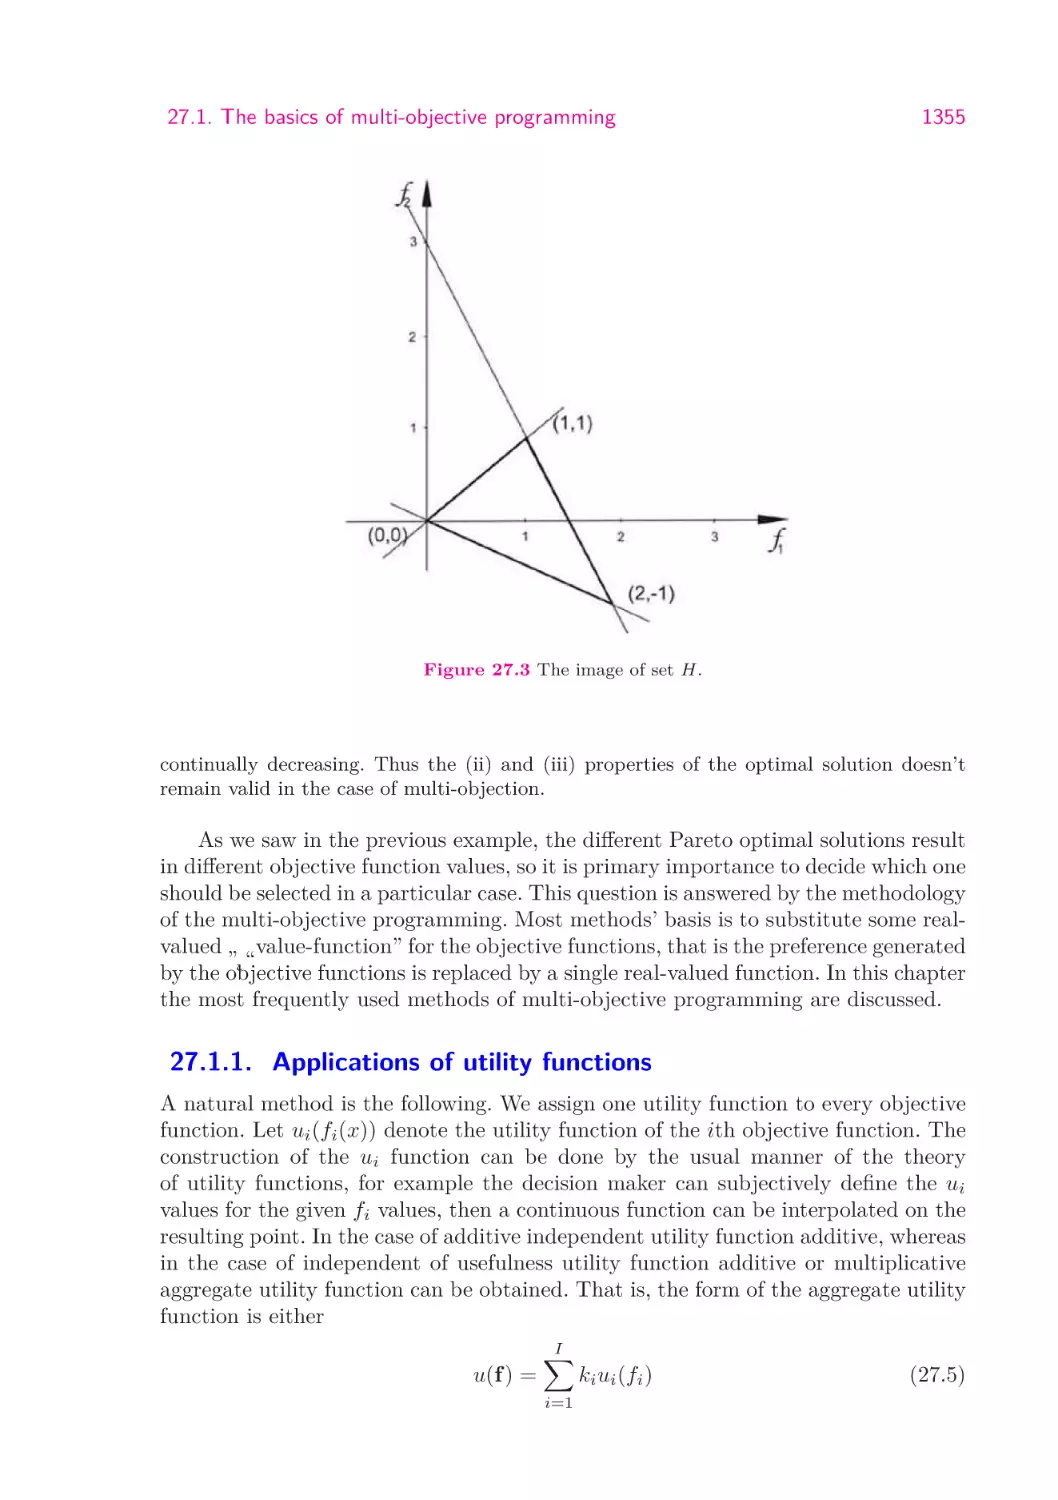 27.1.1.  Applications of utility functions